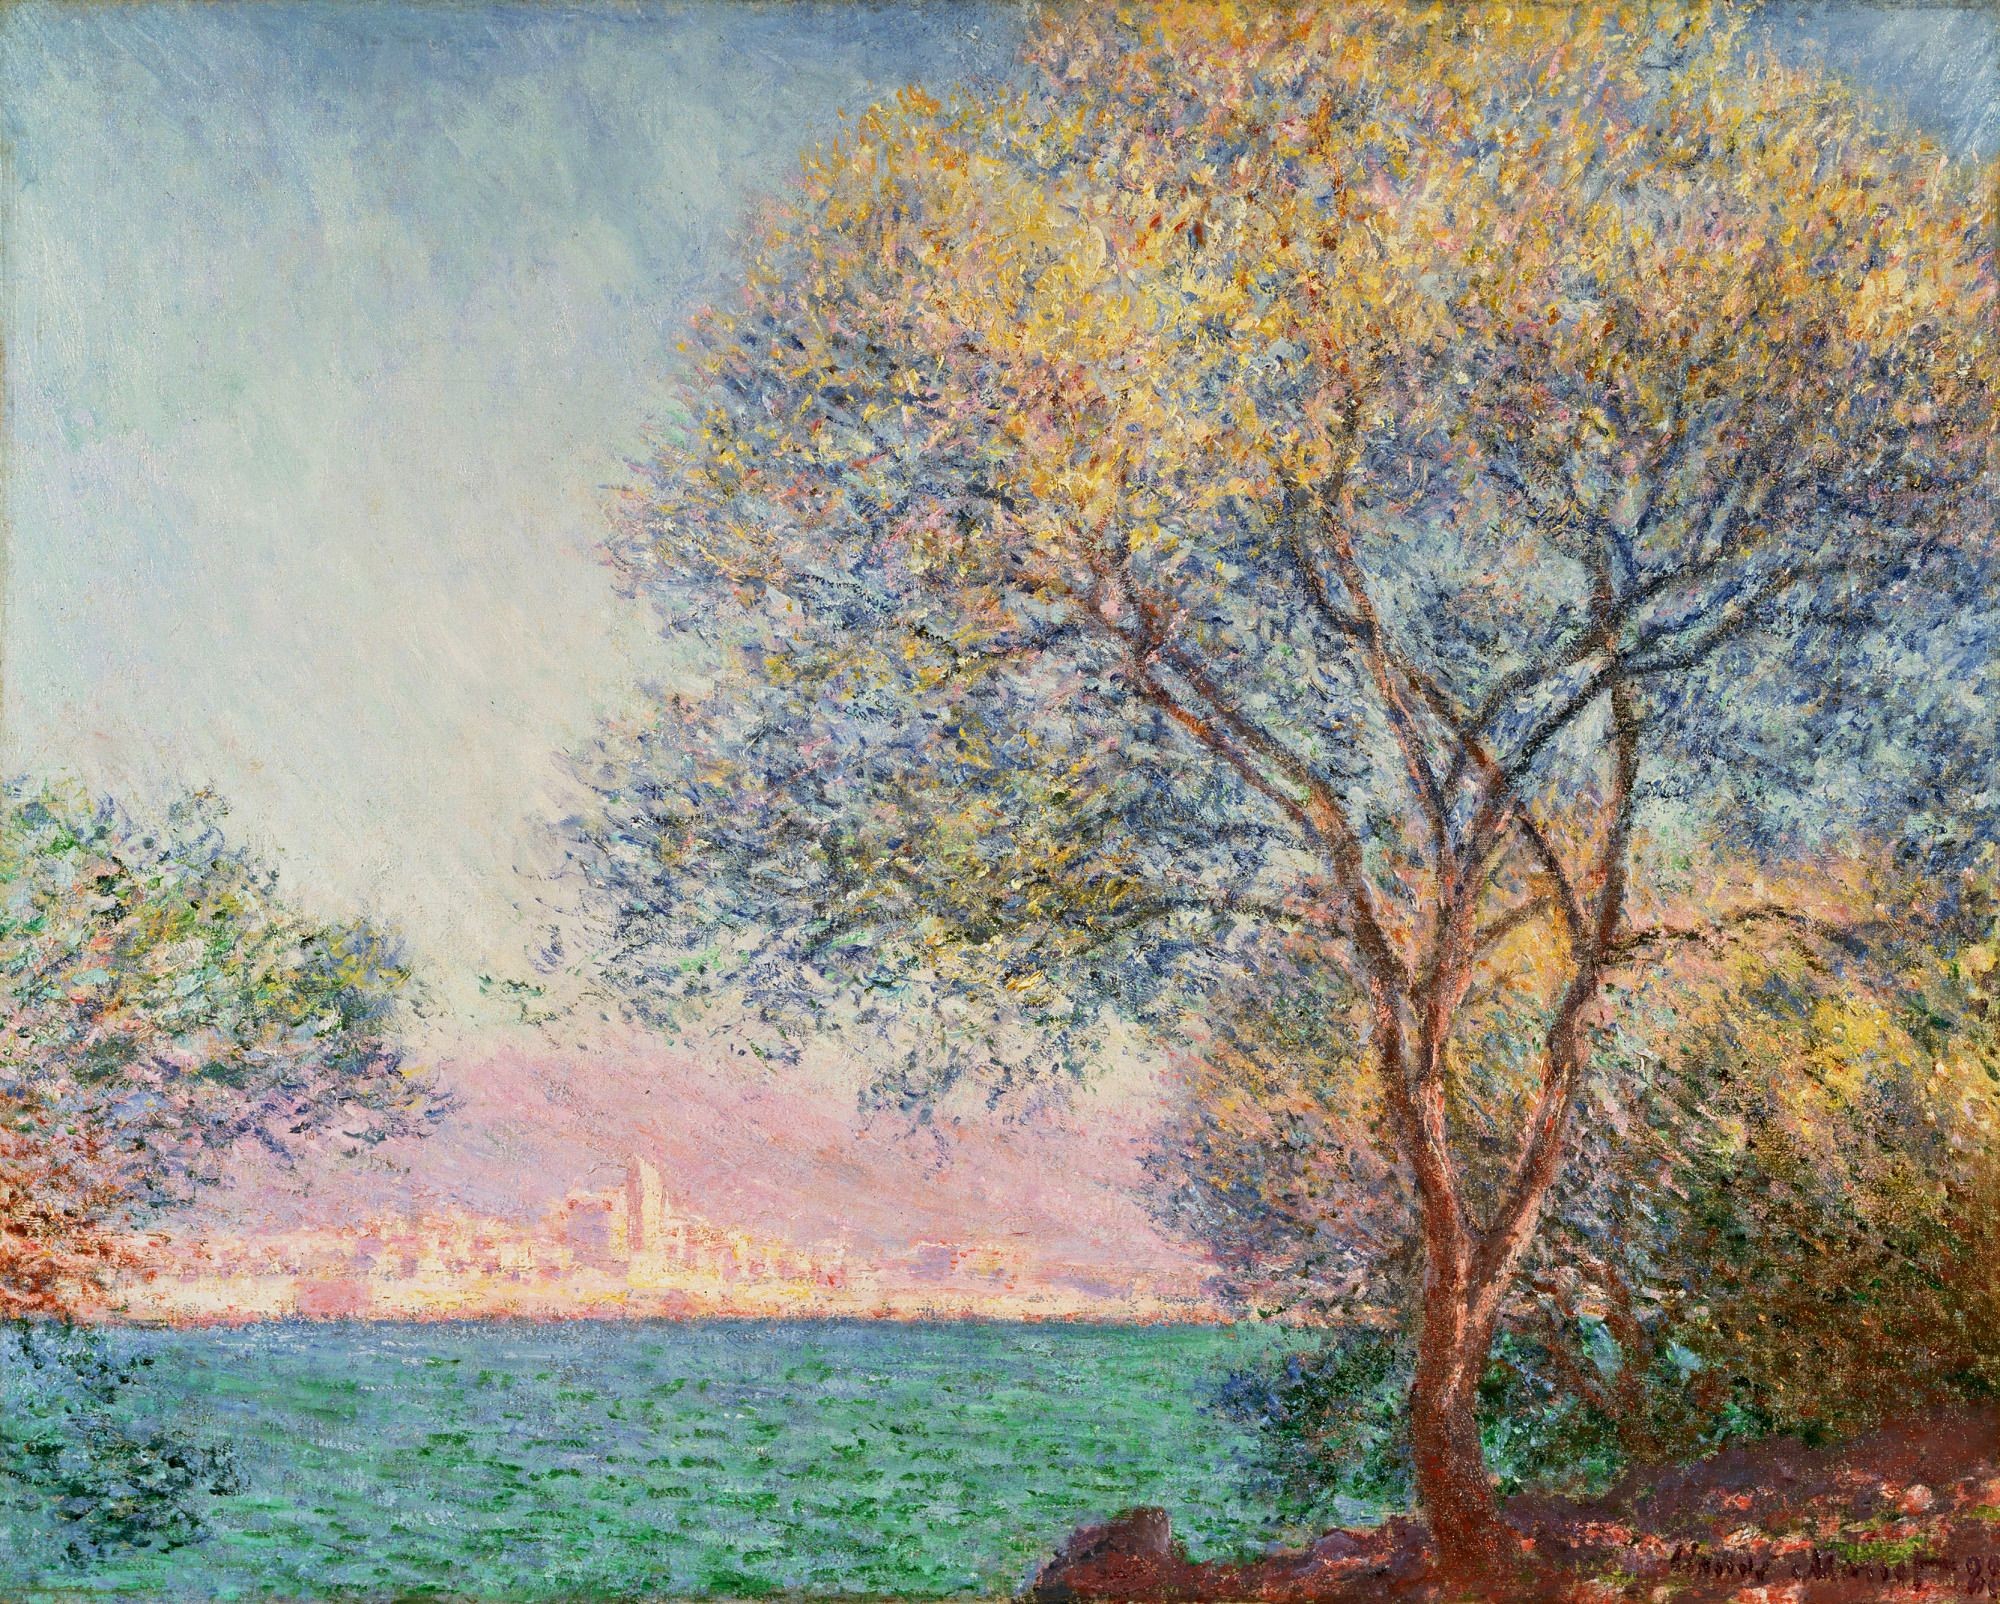 2000x1604 Painting, Monet, Antibes, In, The, Morning, Widescreen, High, Definition,  Wallpaper, For, Desktop, Background, Download, Images, Free, Windows  Wallpaper, ...